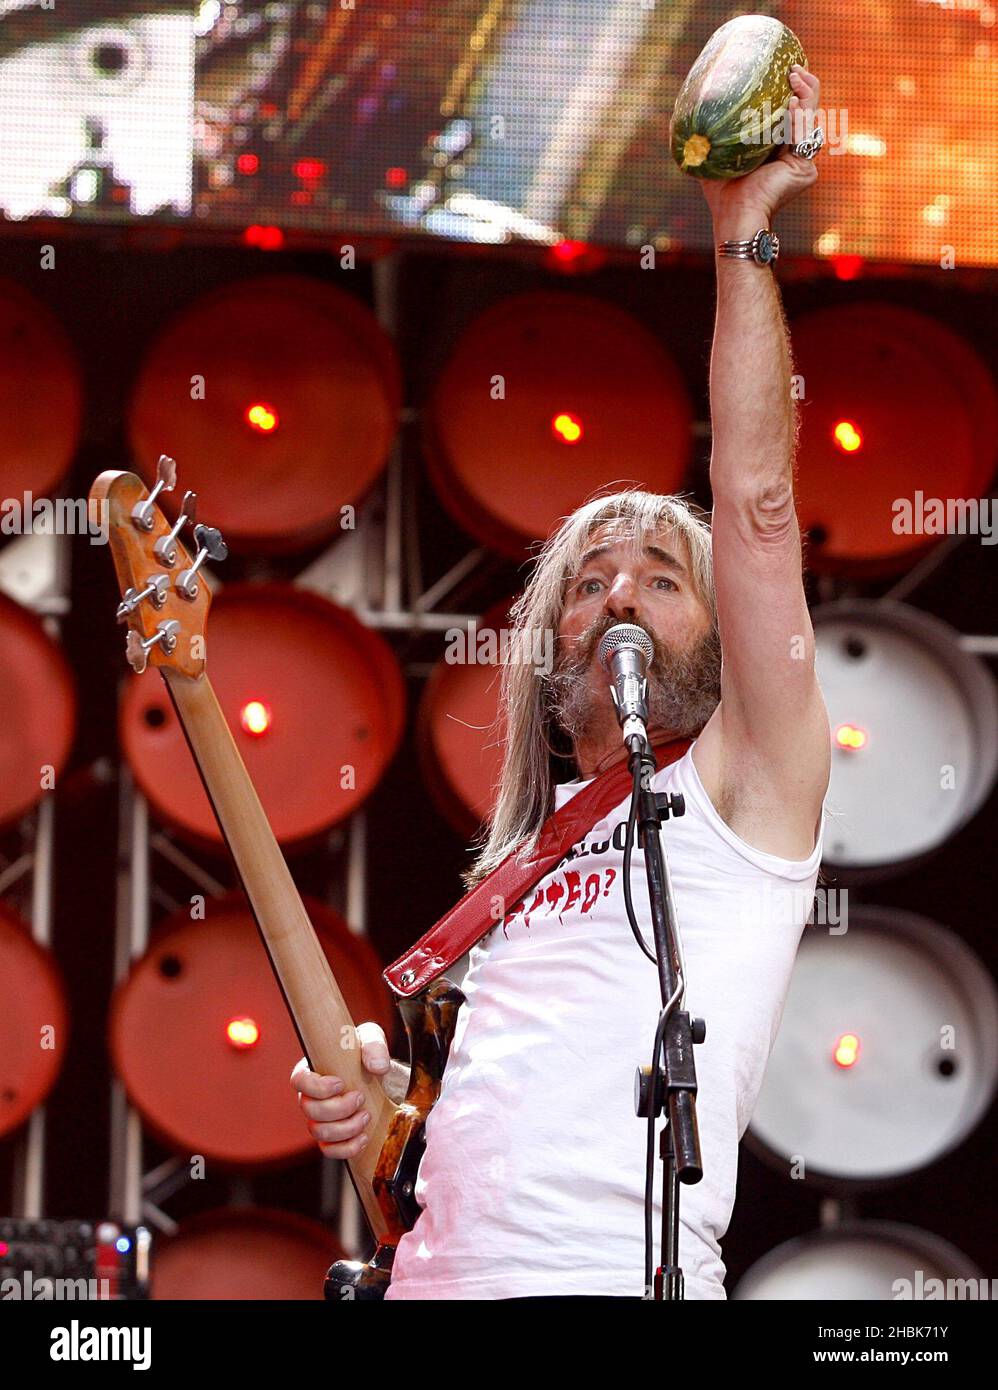 Harry Shearer, member of the fictional band Spinal Tap performs during the charity concert at Wembley Stadium, London. Stock Photo